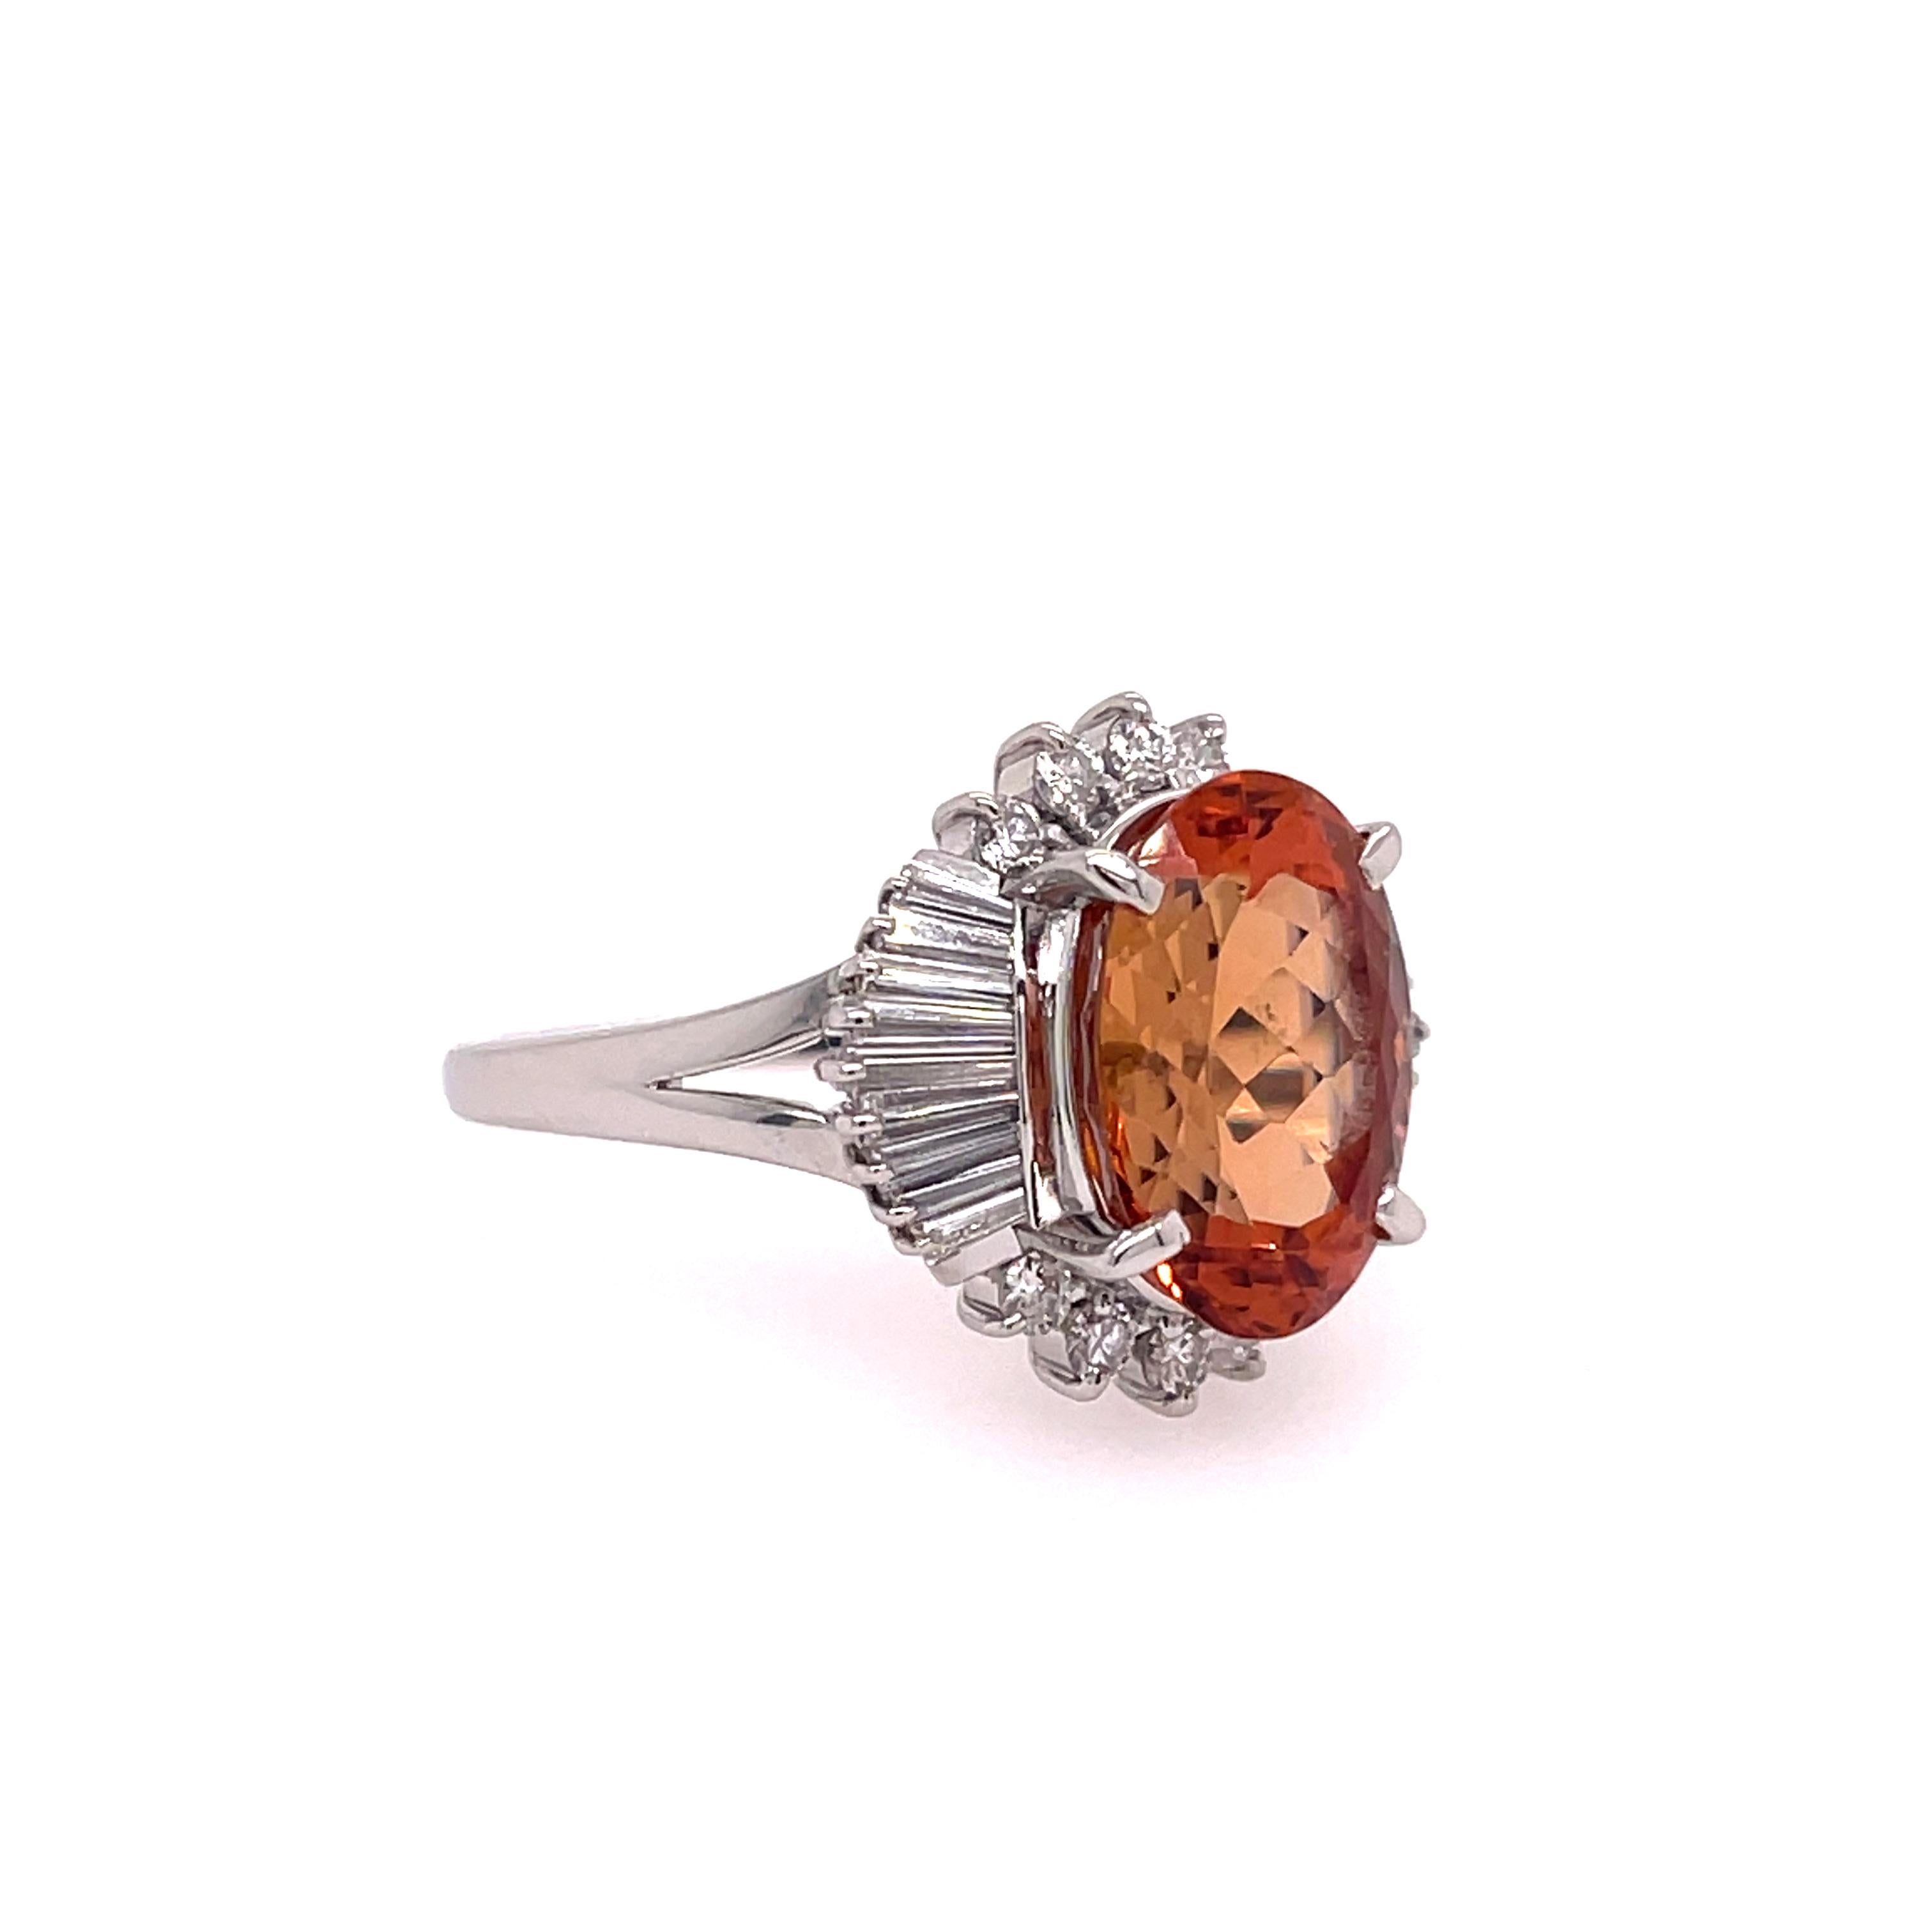 Orange Imperial Topaz (GIA Certified) & Diamond Platinum Ring. The ring features a 6.02ct oval orange imperial topaz and 0.72ctw of diamonds. Ring size 7.50, can be sized.

9.34 grams